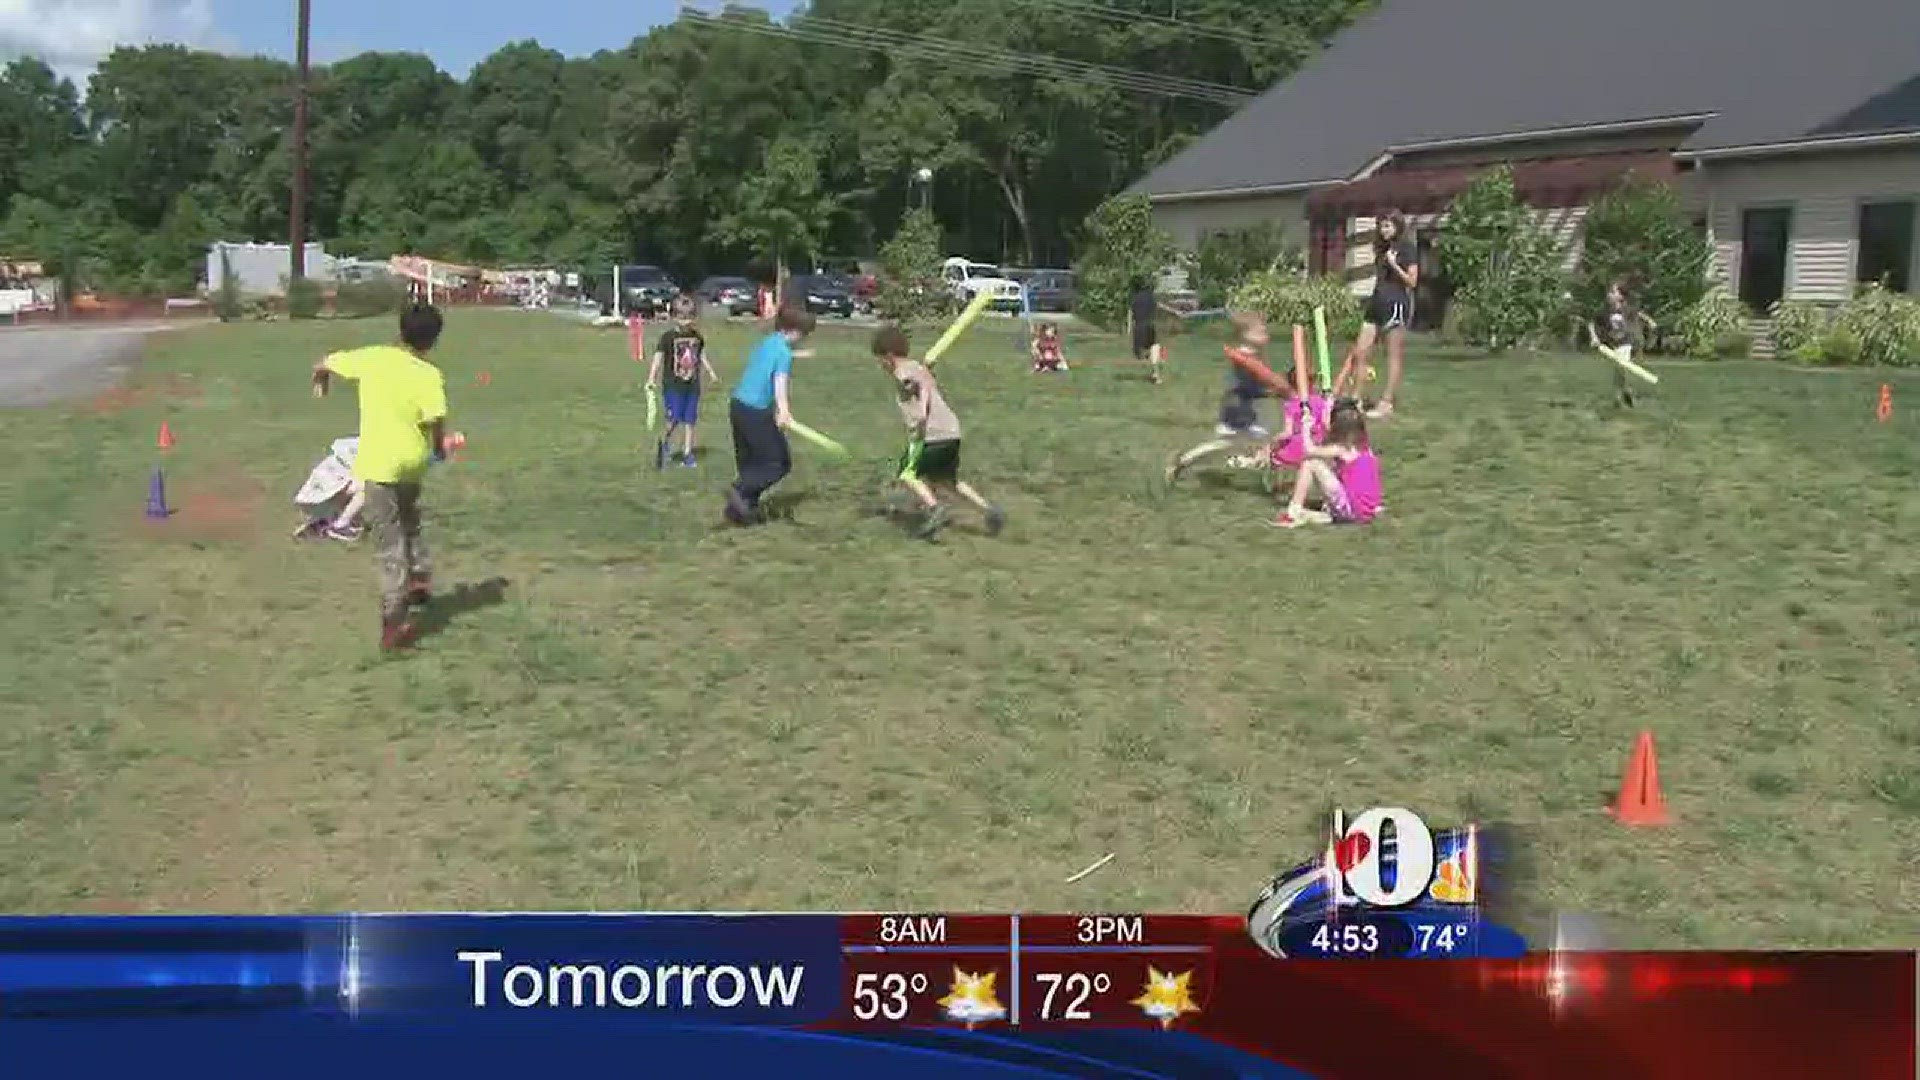 Live at Five at 4May 13, 2016The Episcopal School of Knoxville and the PE department host a Star Wars Themed Field Day.